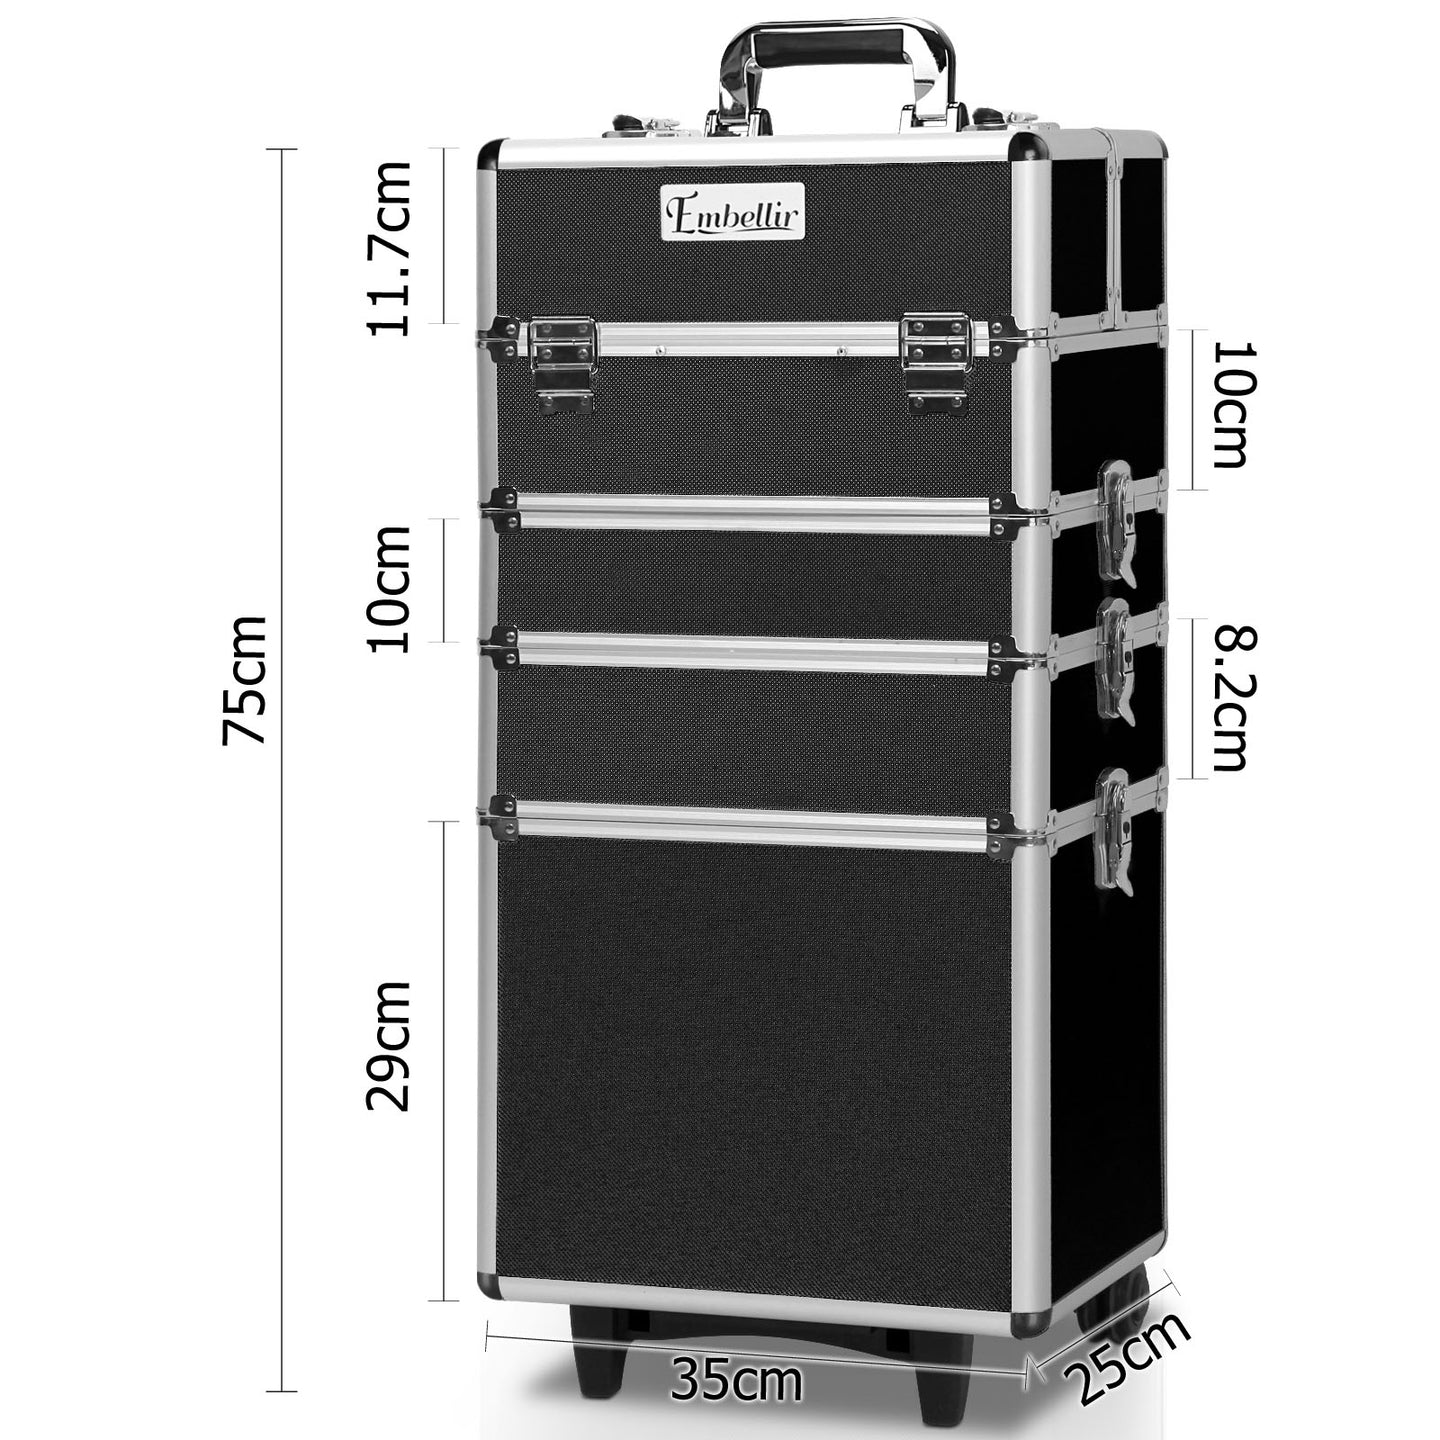 Embellir 7 in 1 Portable Cosmetic Beauty Makeup Trolley - Black - Delldesign Living - Health & Beauty > Cosmetic Storage - 